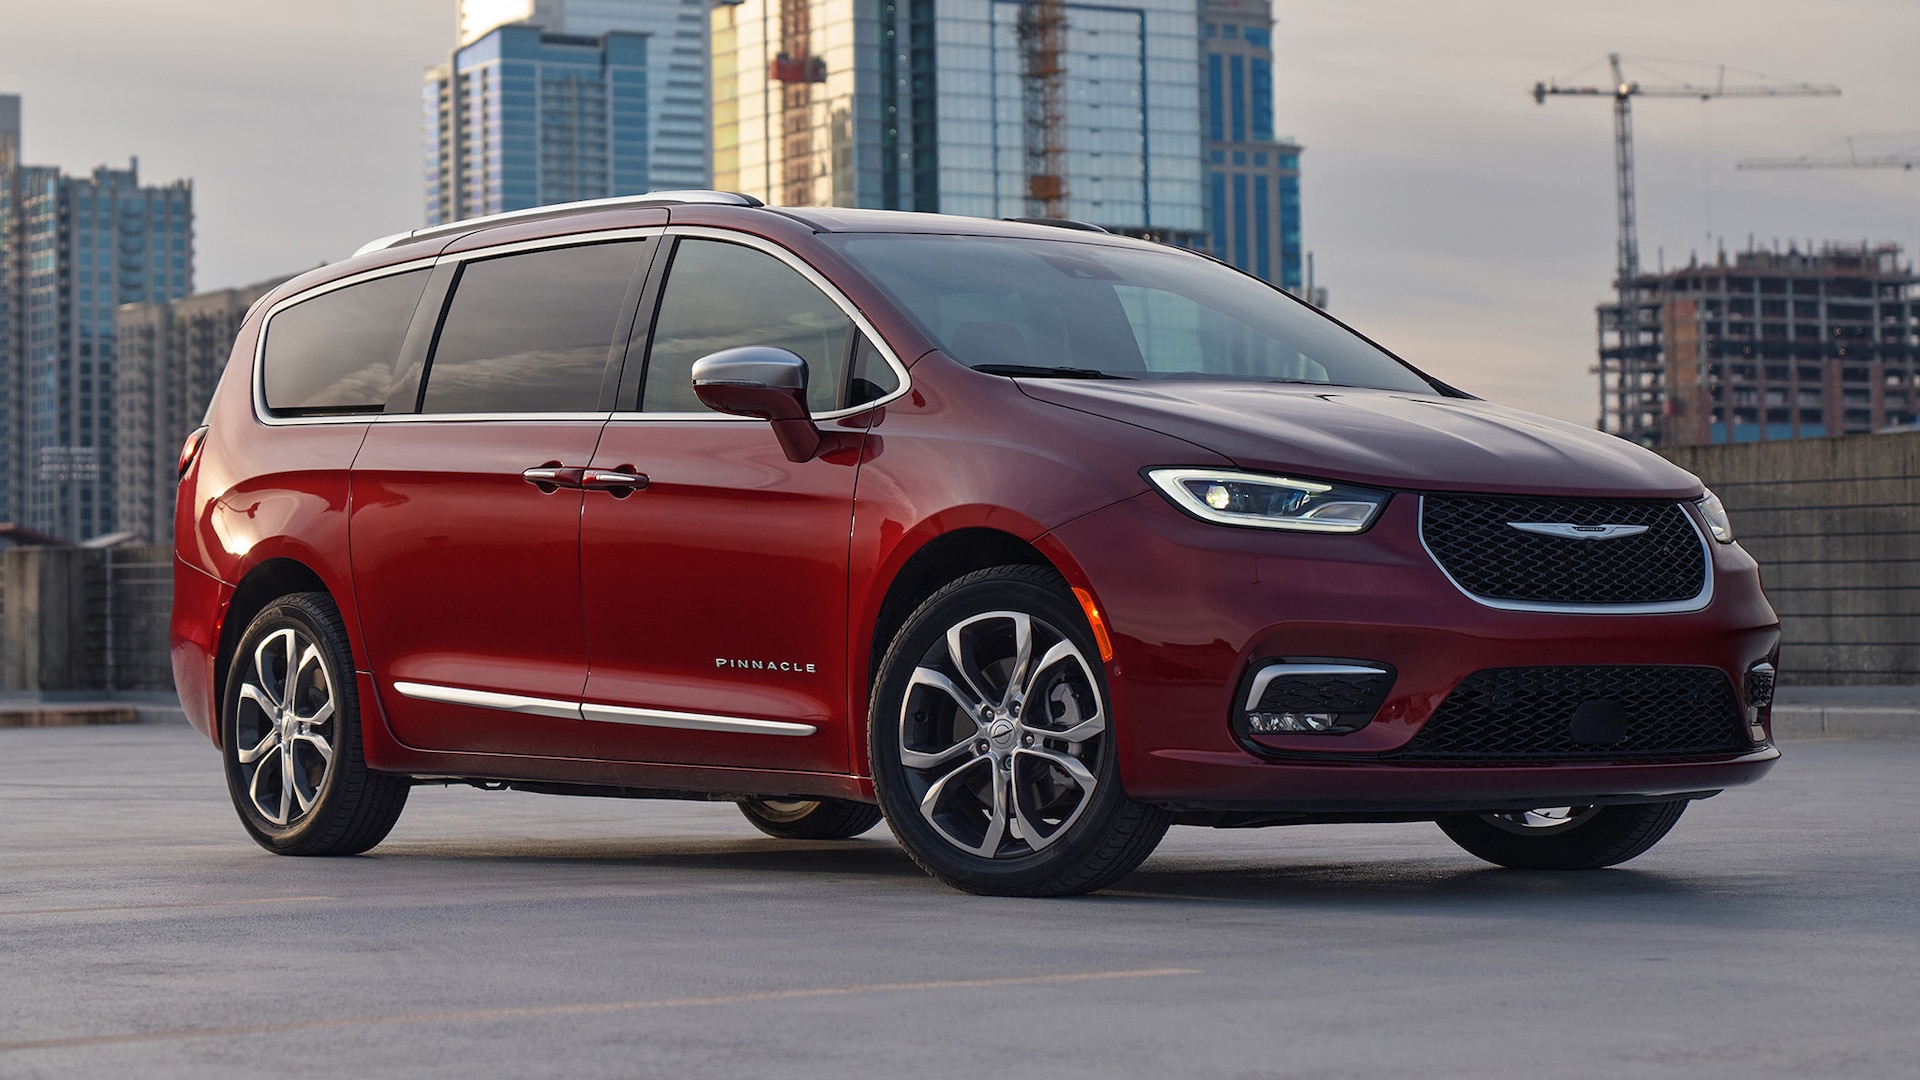 2022 Chrysler Pacifica Prices, Reviews, and Photos - MotorTrend